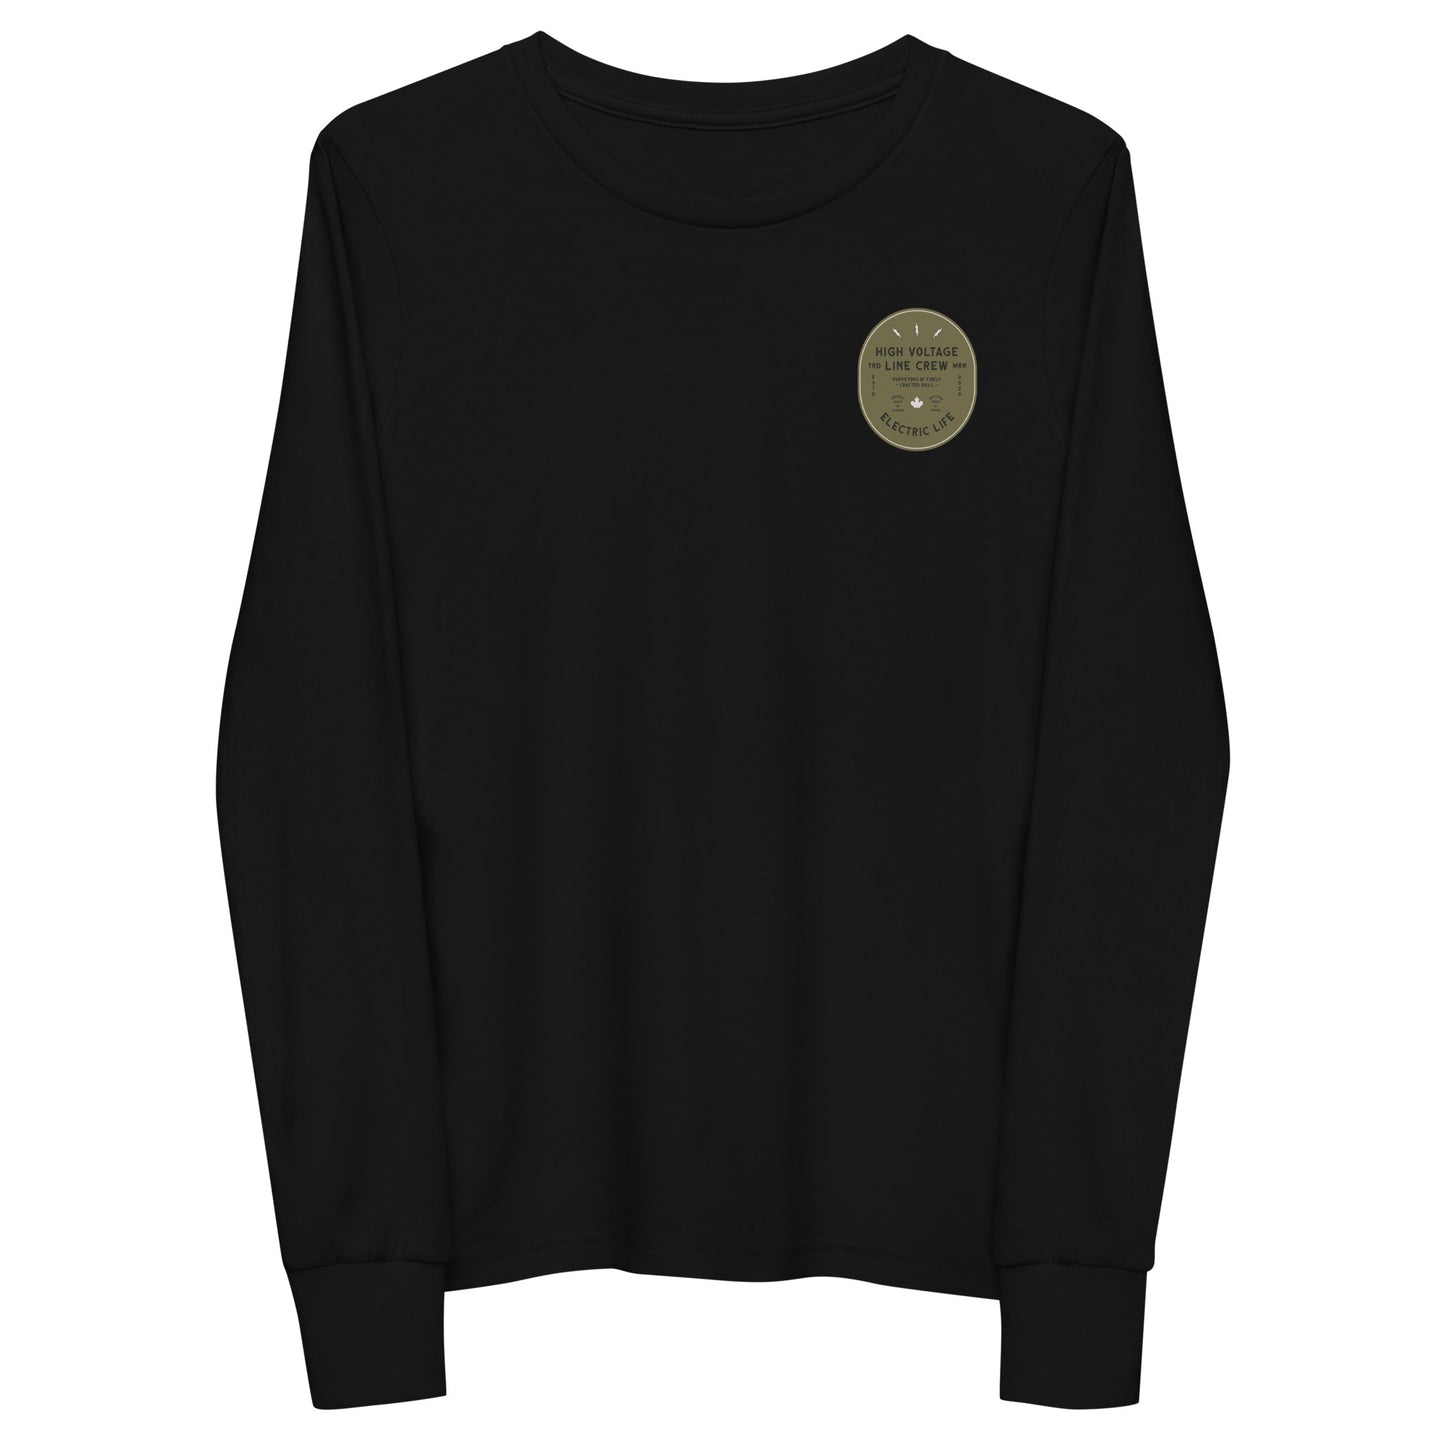 HV CLASSIC YOUTH LONG SLEEVE